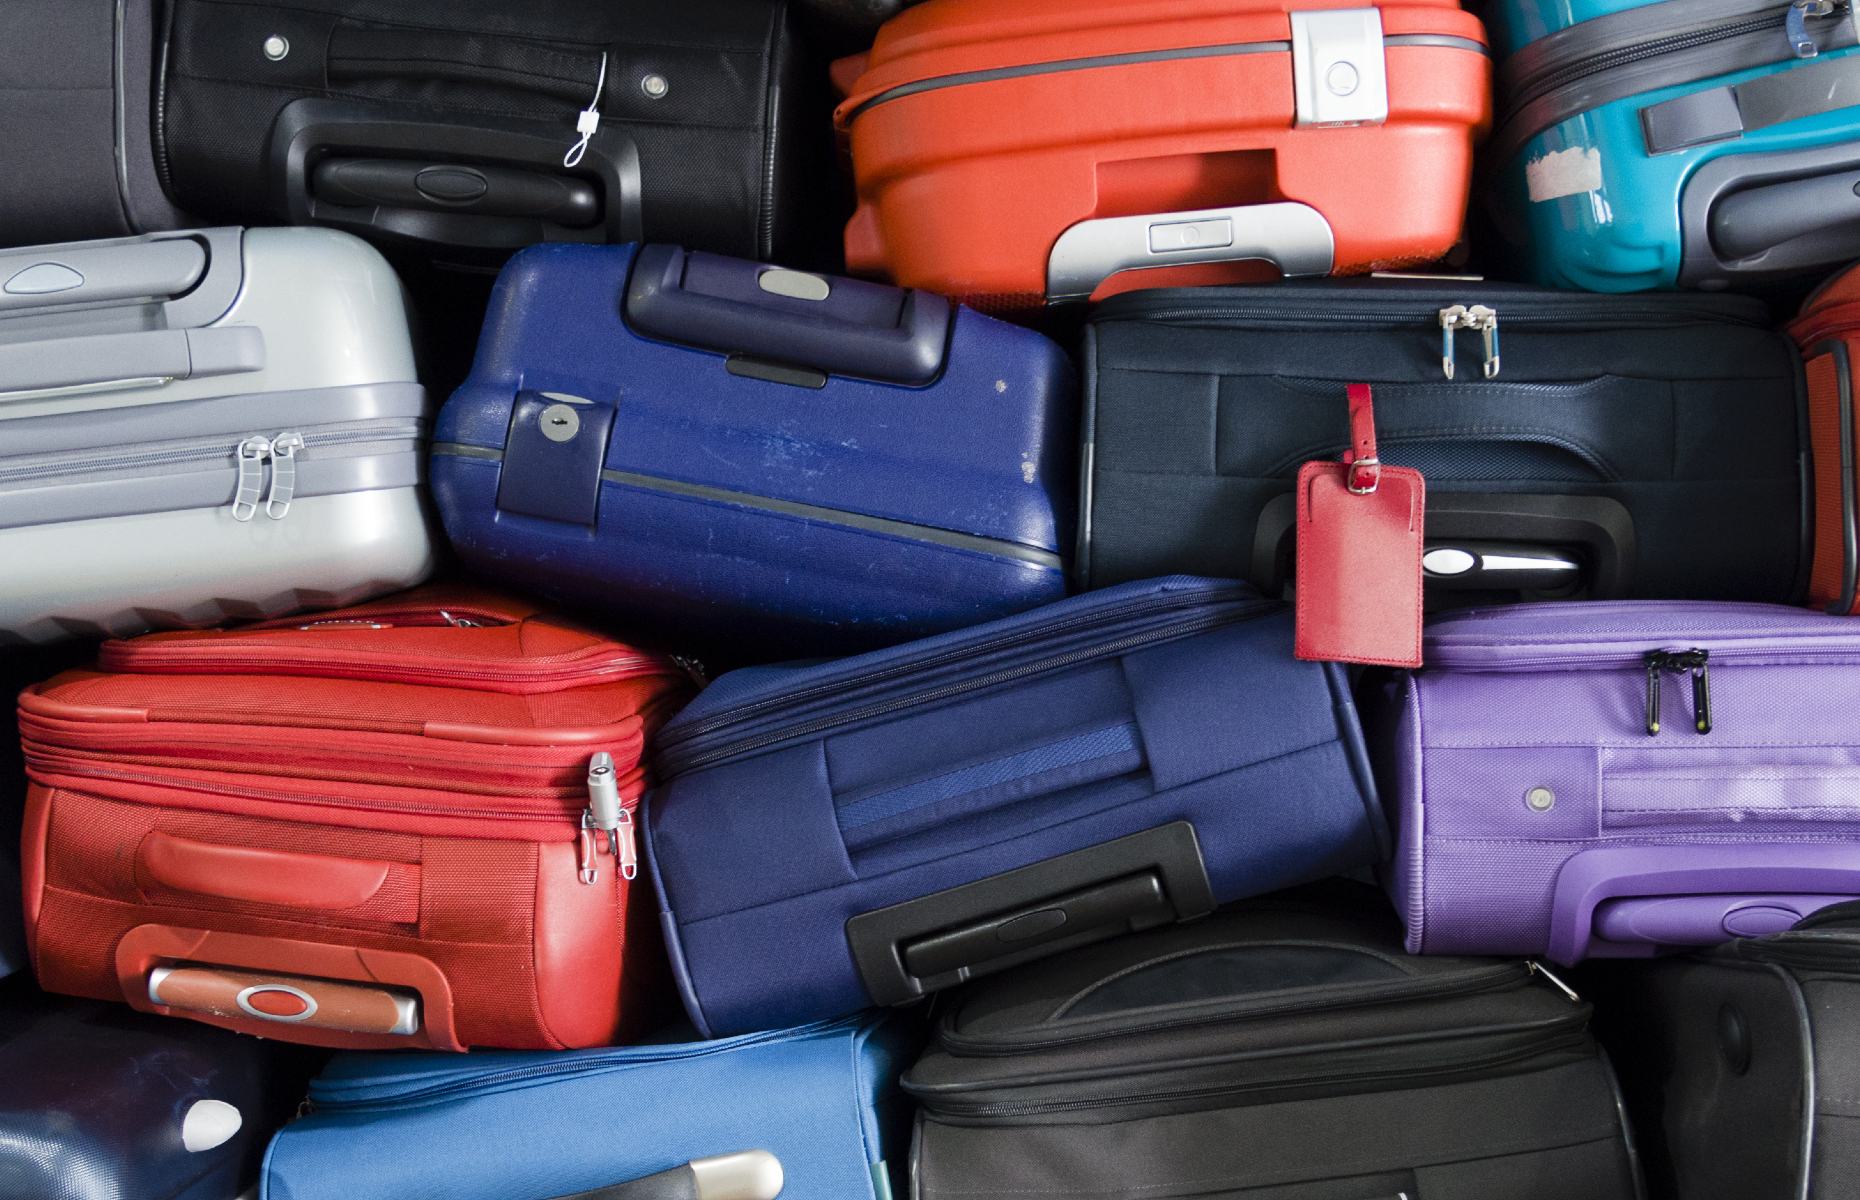 Multi-coloured suitcases stacked on top of each other (Image: Maurizio Milanesio/Shutterstock)